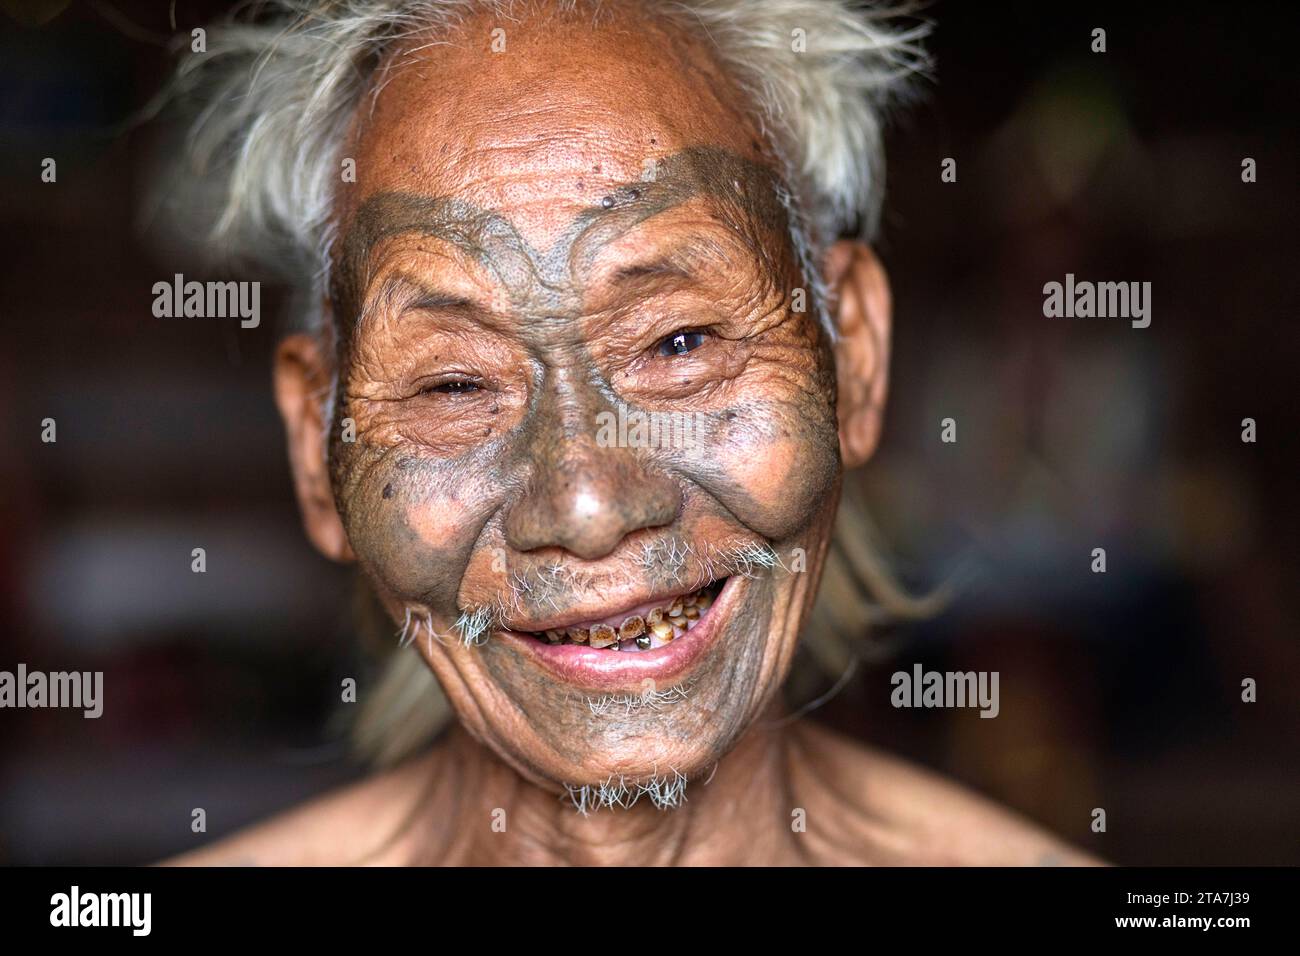 Portarit of an elder, a man from a konyak tribe with traditional tribal tattoos on his face , smiling in the camera, Nagaland, India Stock Photo